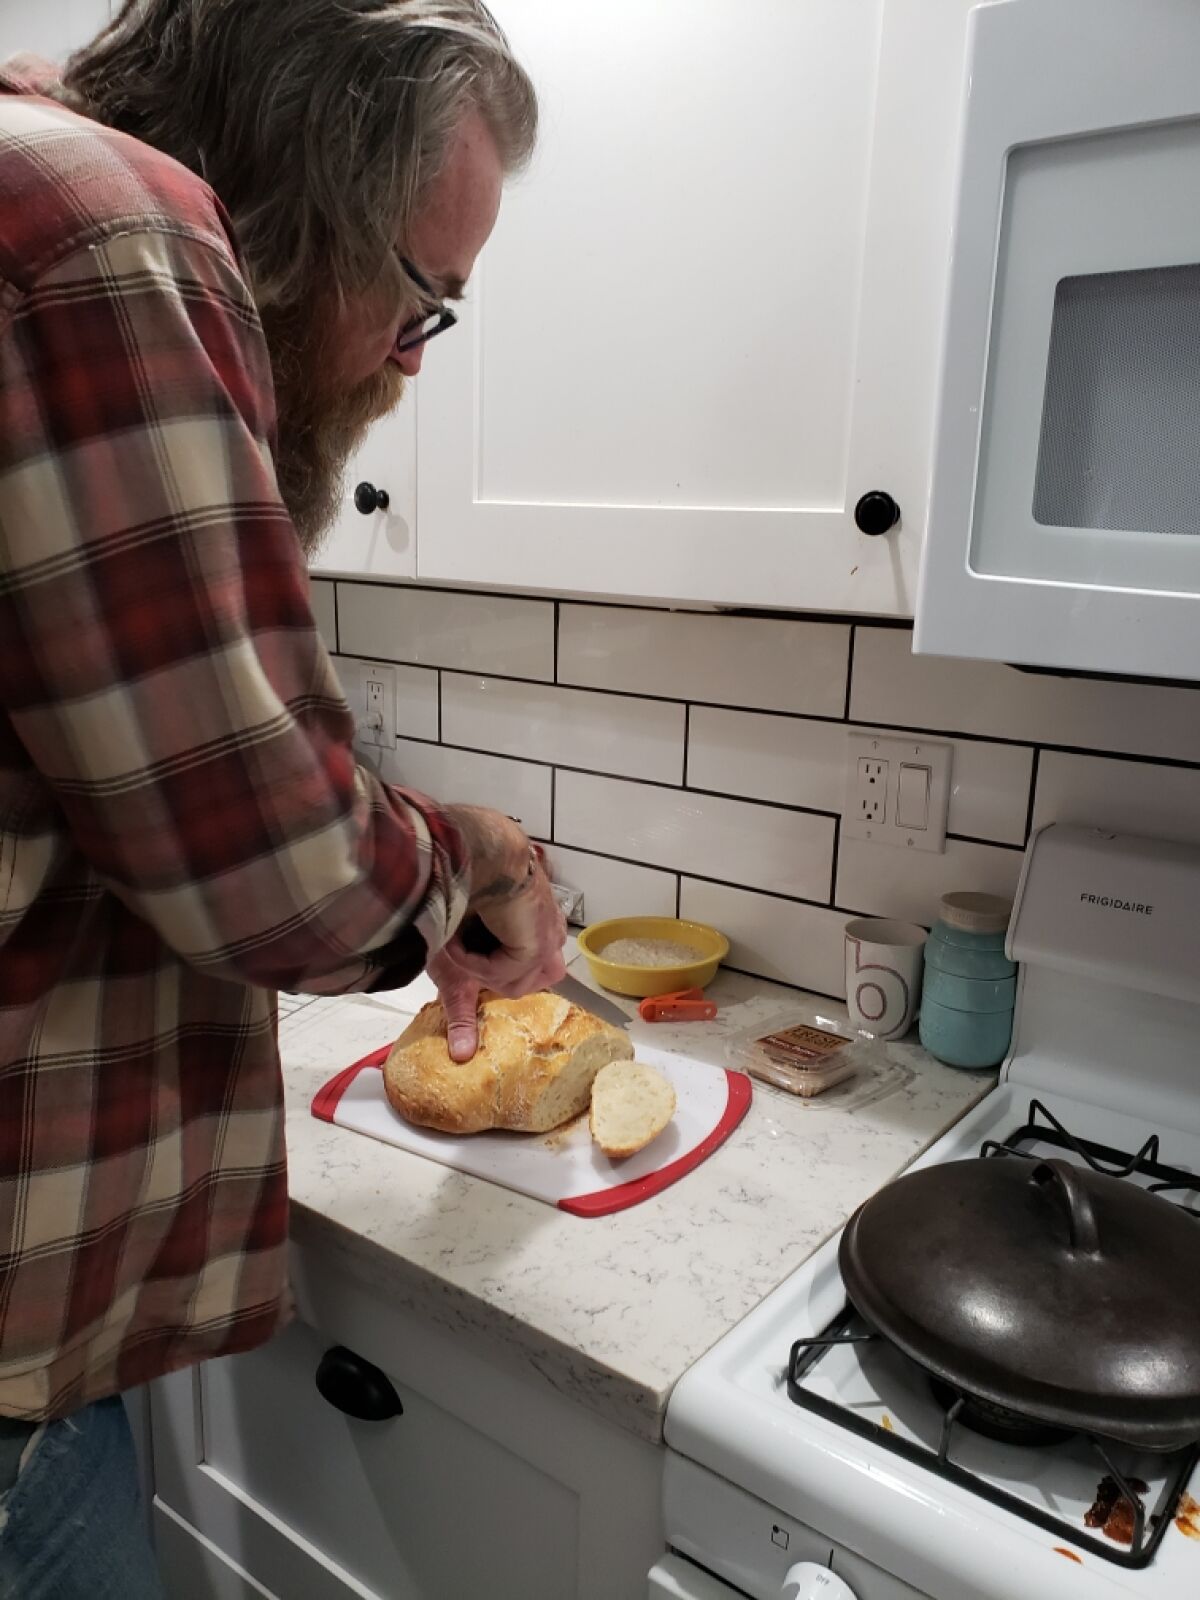 Brian Robbins of Escondido slices some bread he baked recently as part of his family's new homesteading hobby.